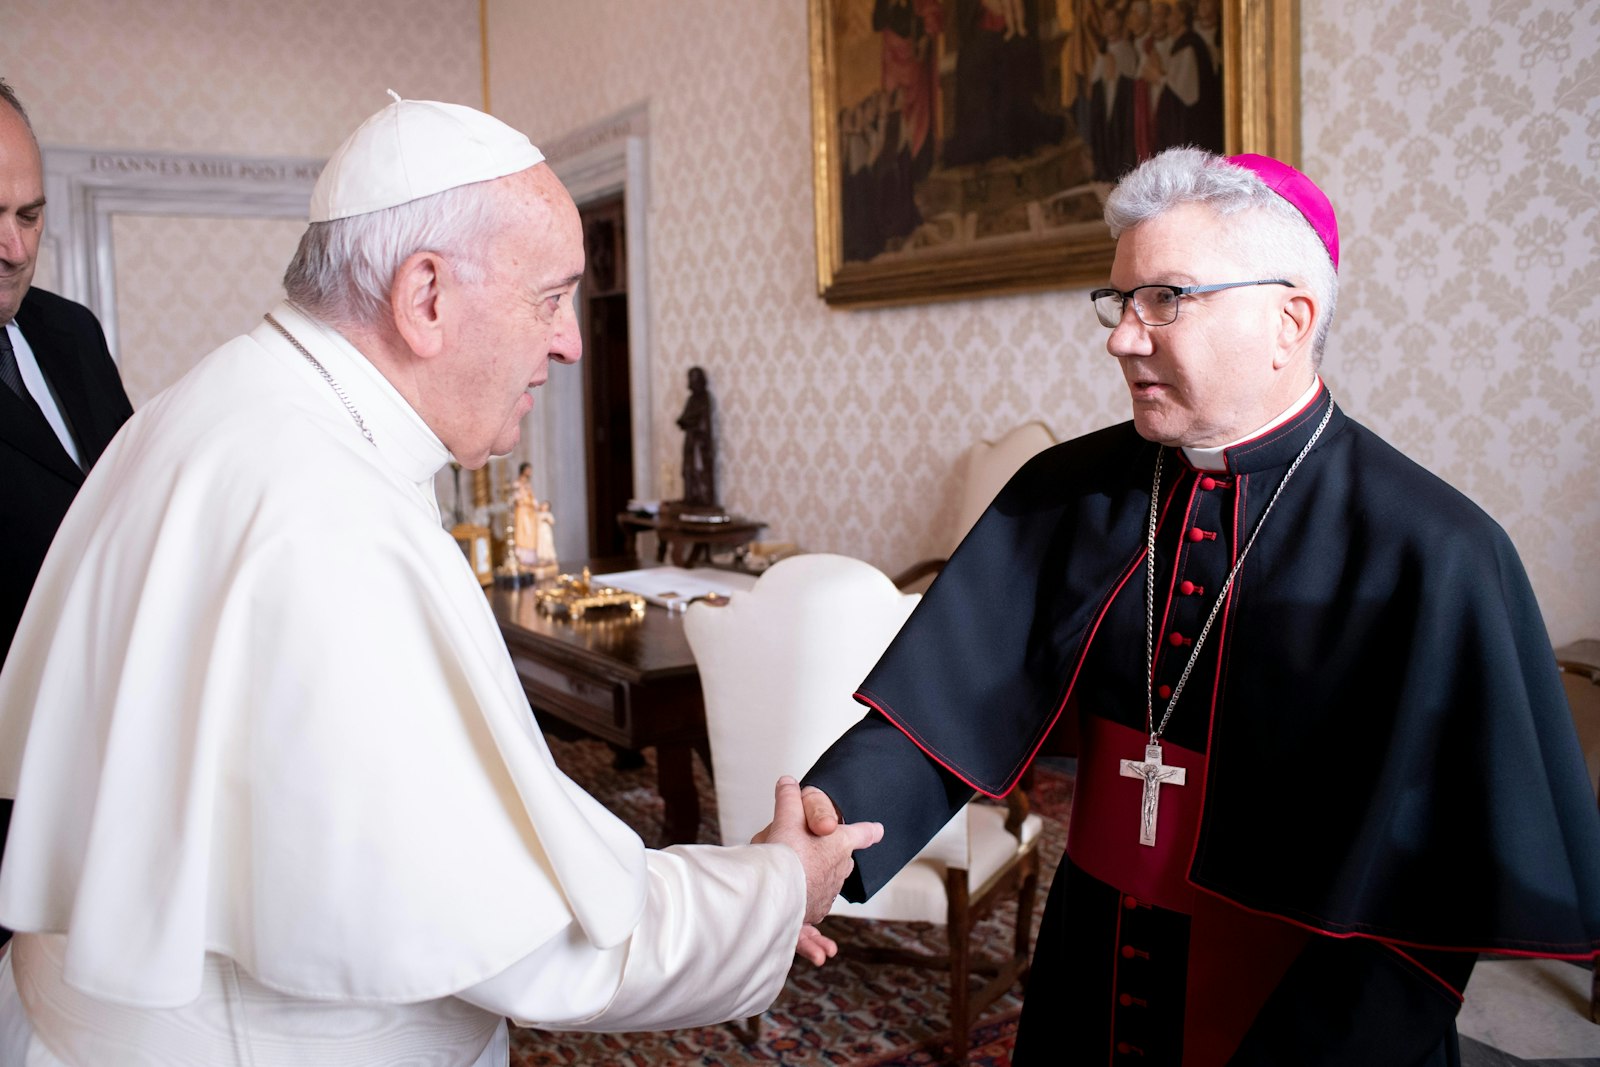 Pope Francis greets Bishop Jeffrey M. Monforton of Steubenville, Ohio, during a meeting with U.S. bishops from Ohio and Michigan making their "ad limina" visits to the Vatican Dec. 10, 2019. (CNS photo/Vatican Media)